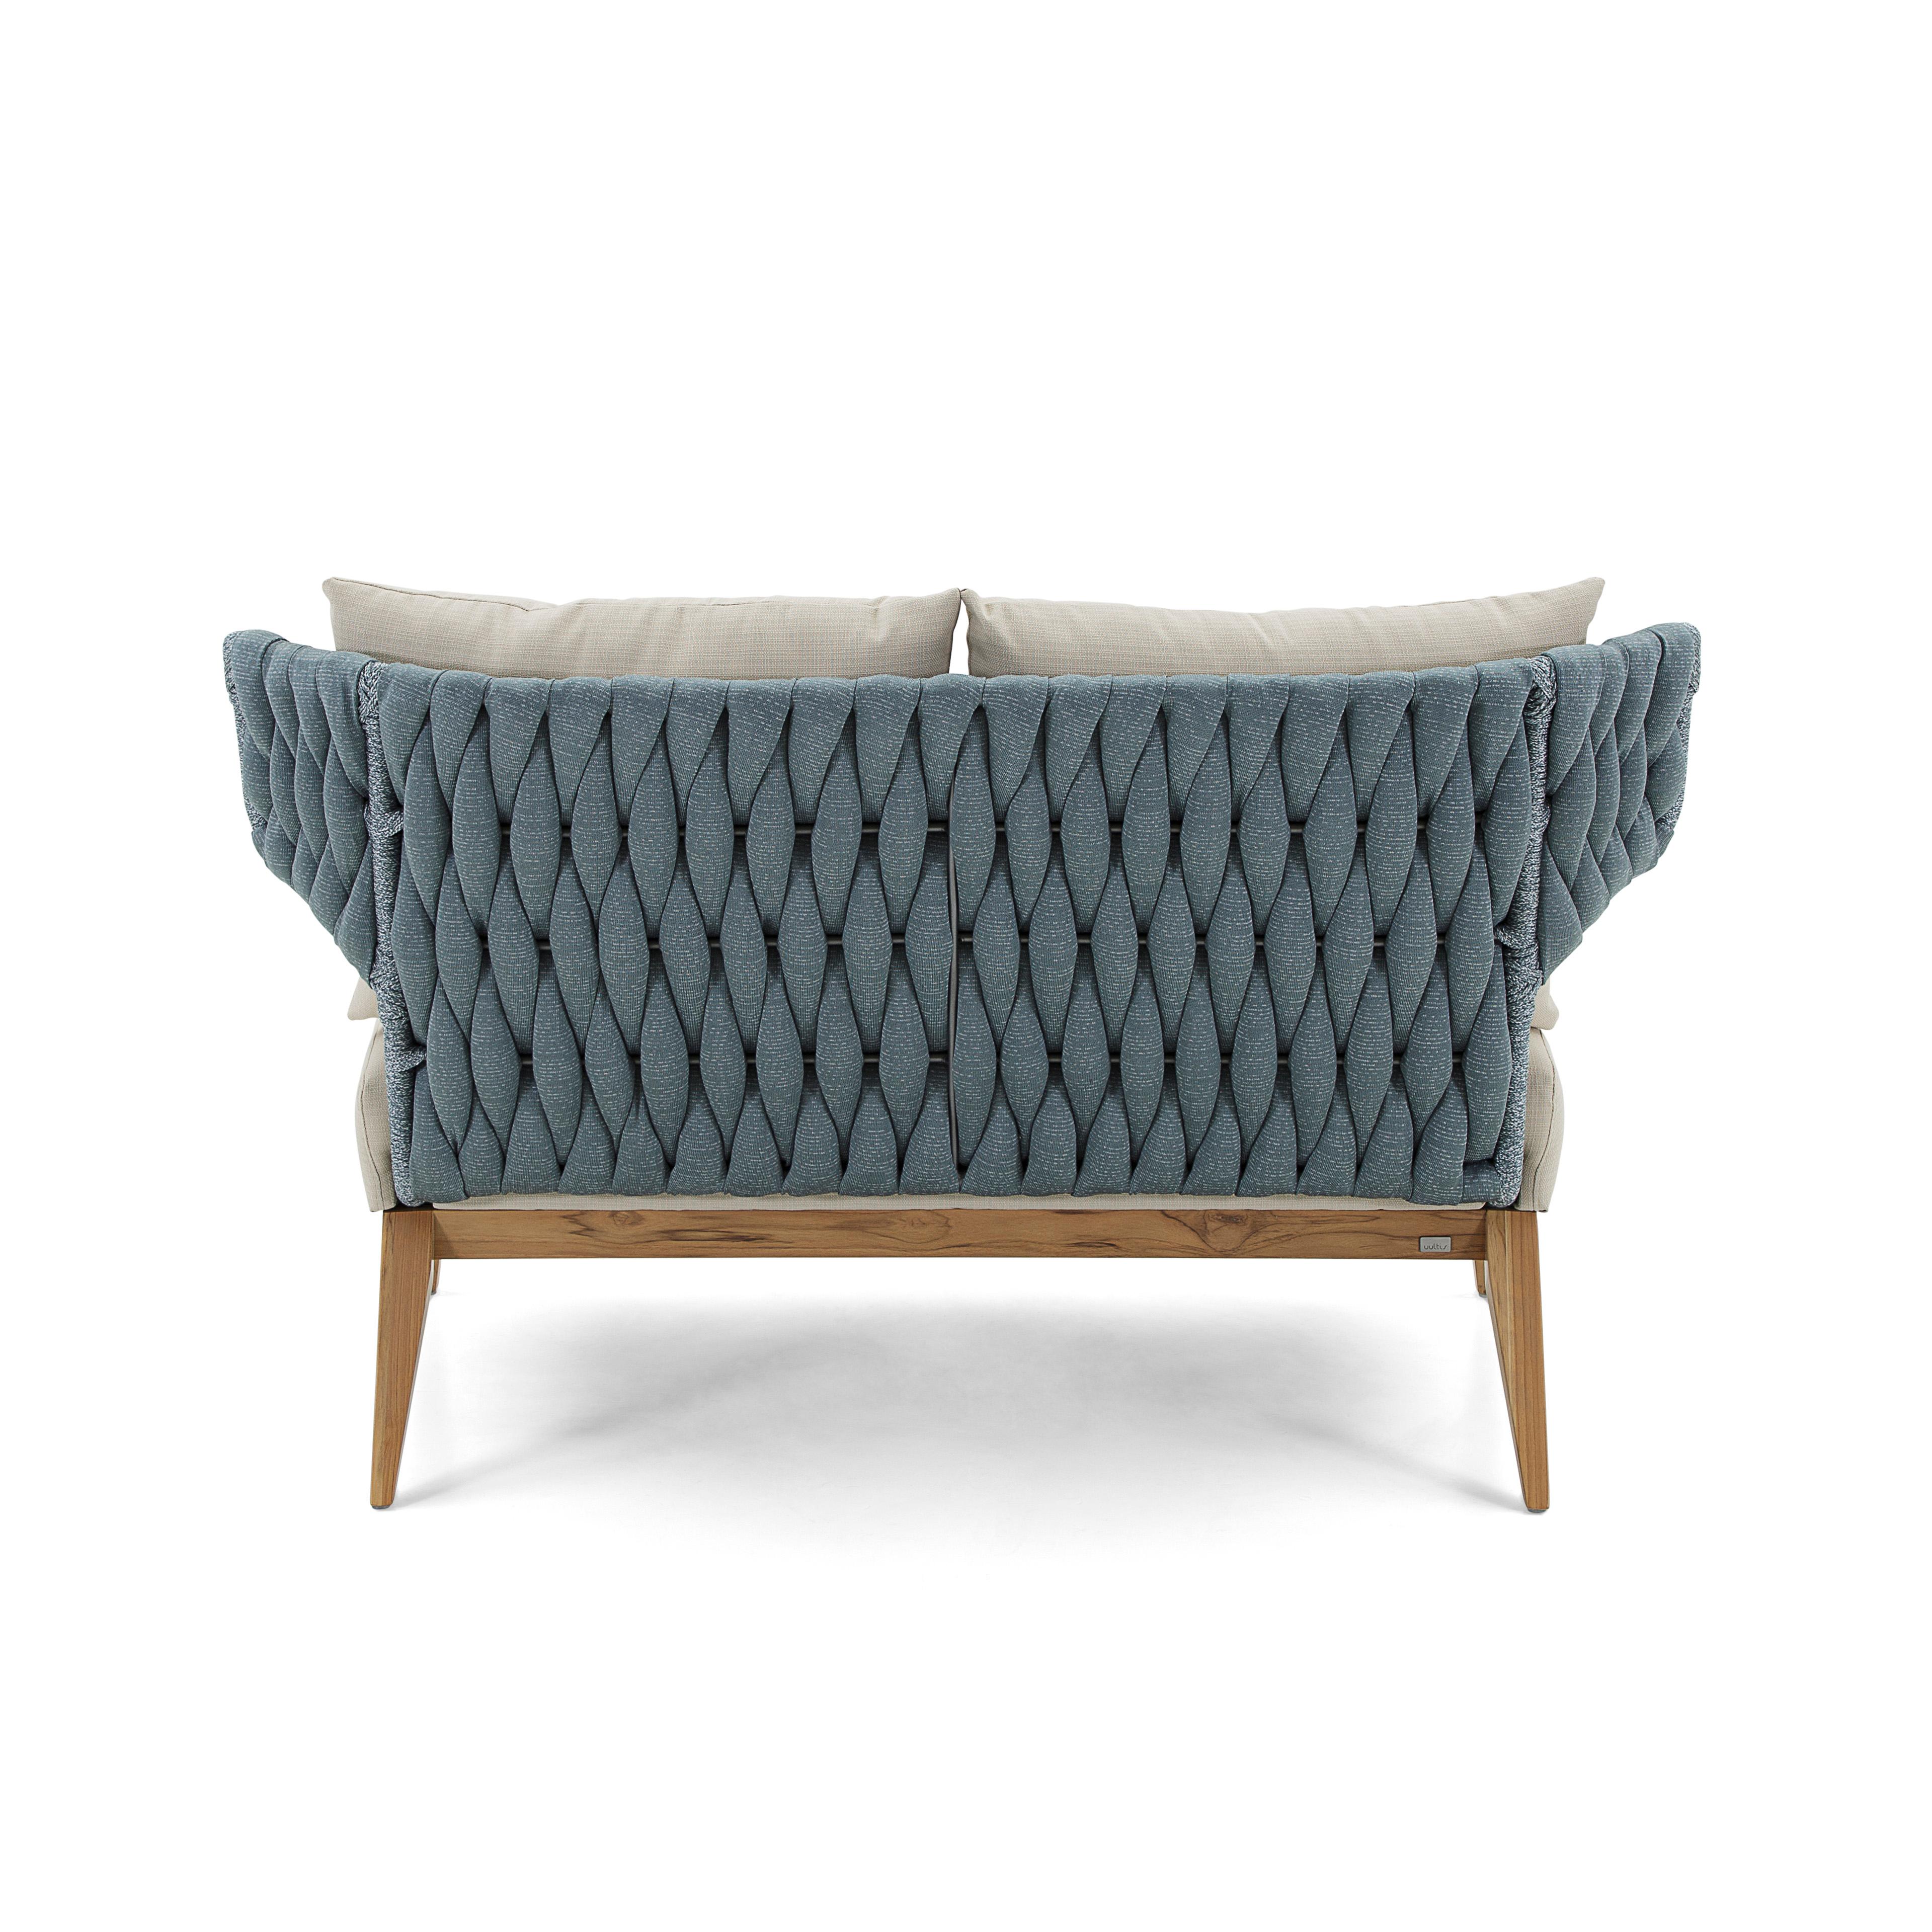 Beluga Outdoor Loveseat in Beige and Blue fabric and Teak wood In New Condition For Sale In Miami, FL